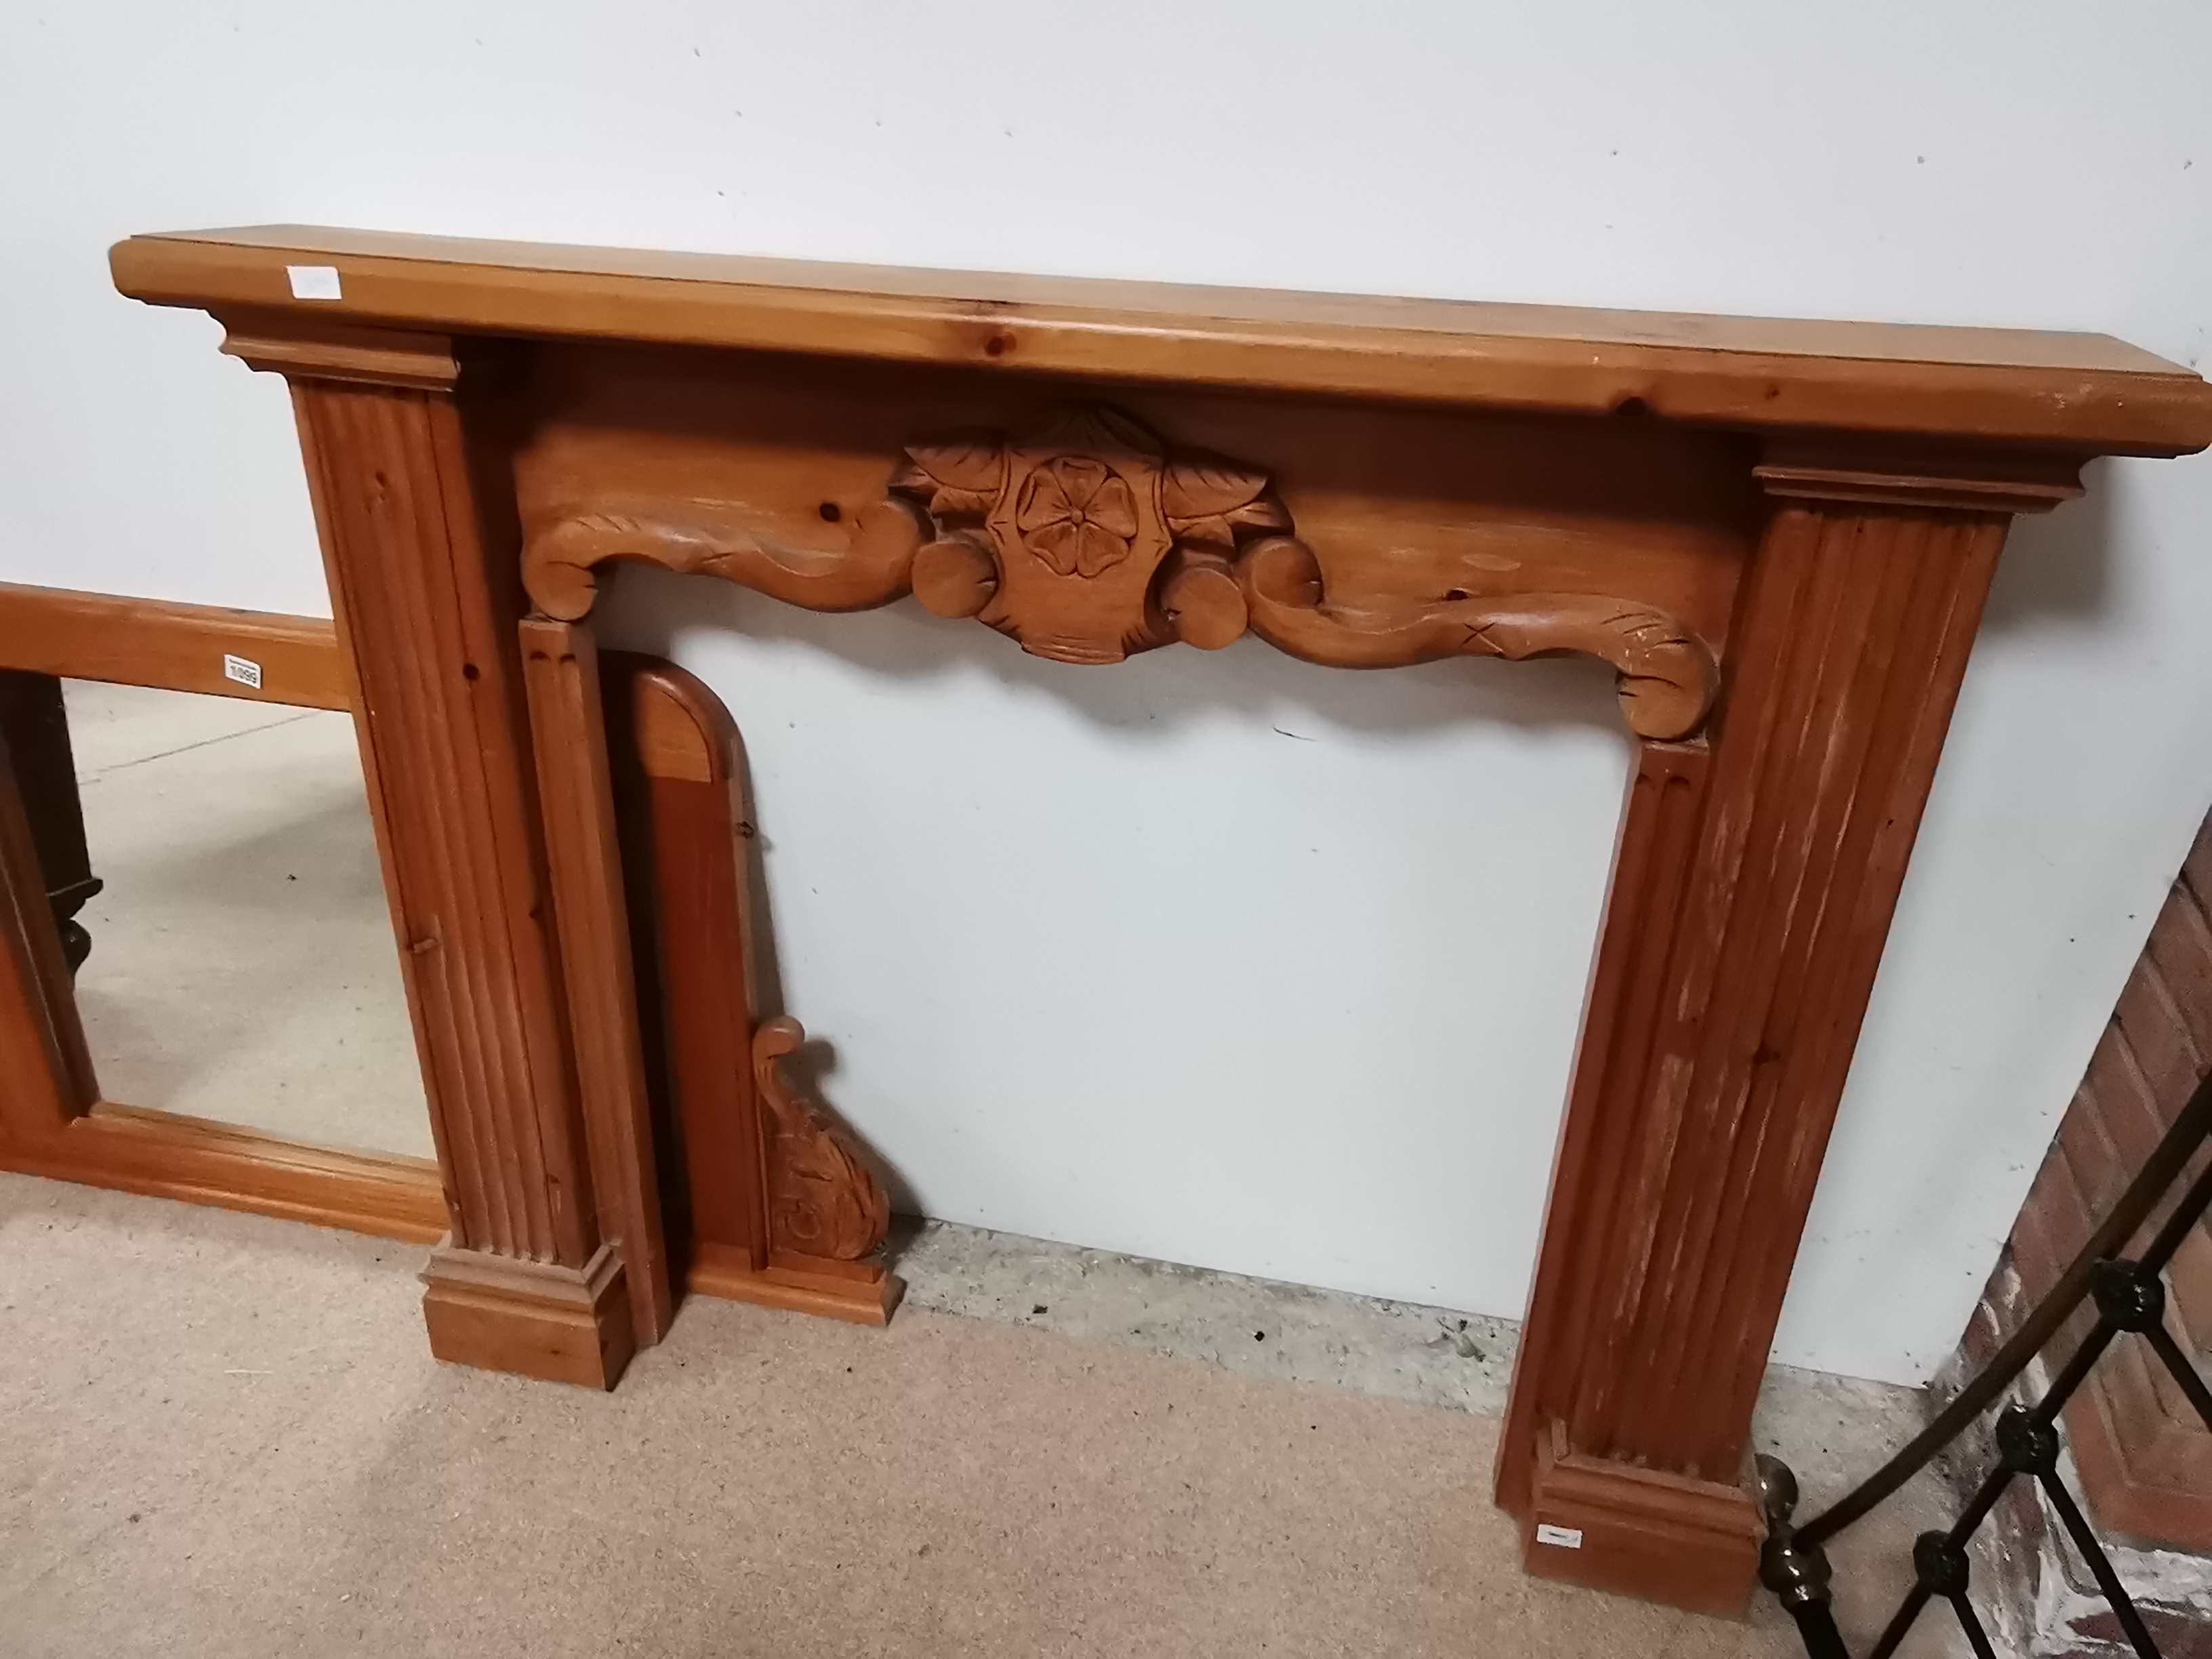 Fire surround with carved rose design and over mantle mirror